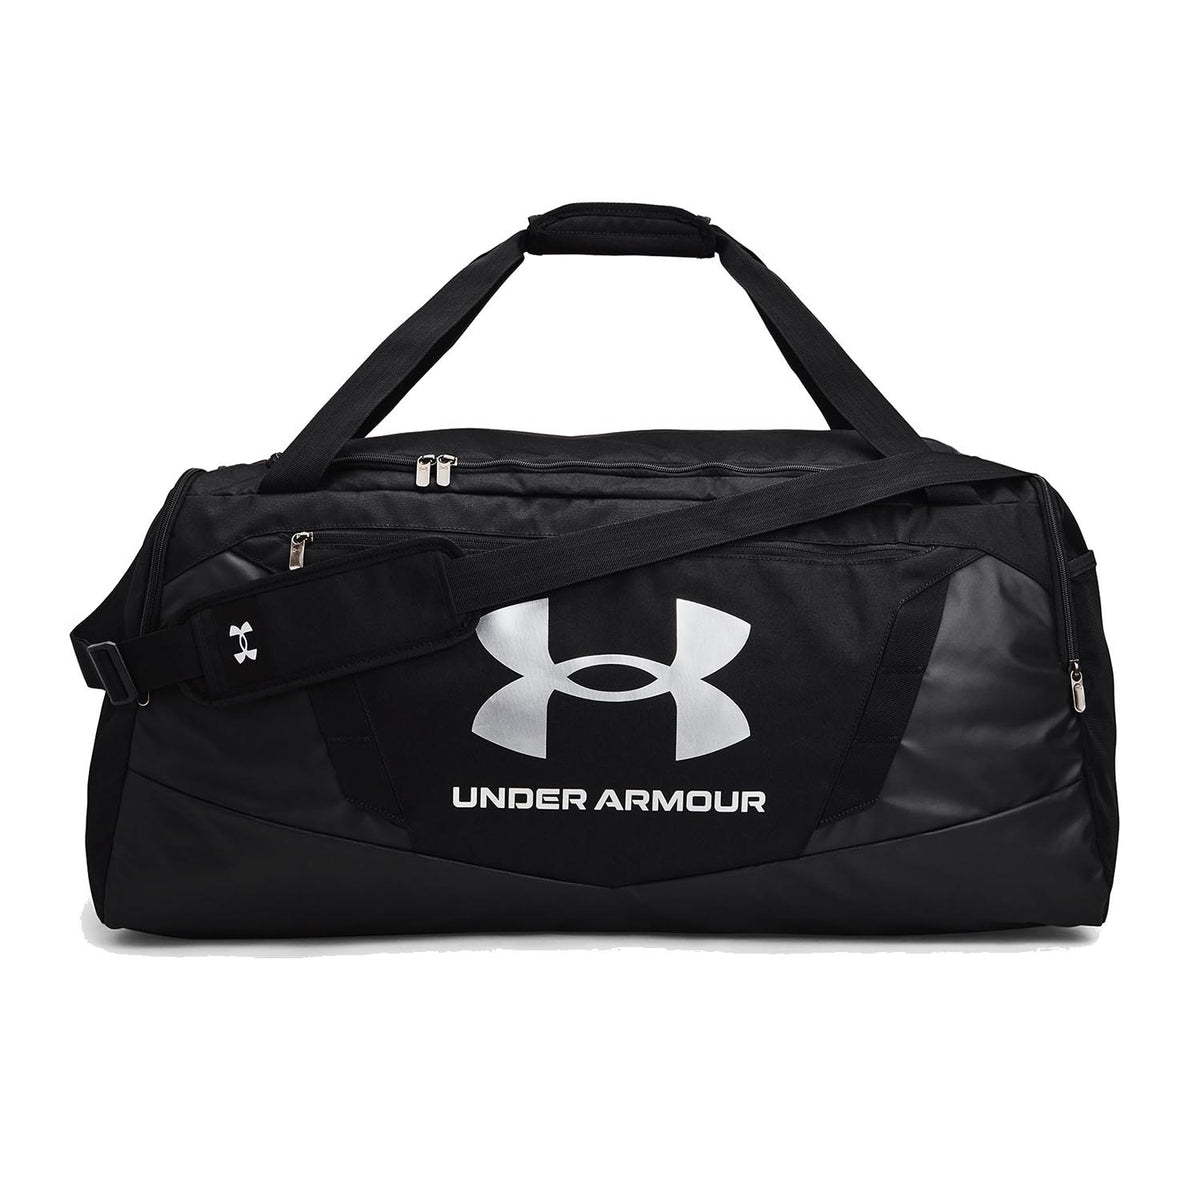 Under Armour Undeniable 5.0 Large Duffel Bag